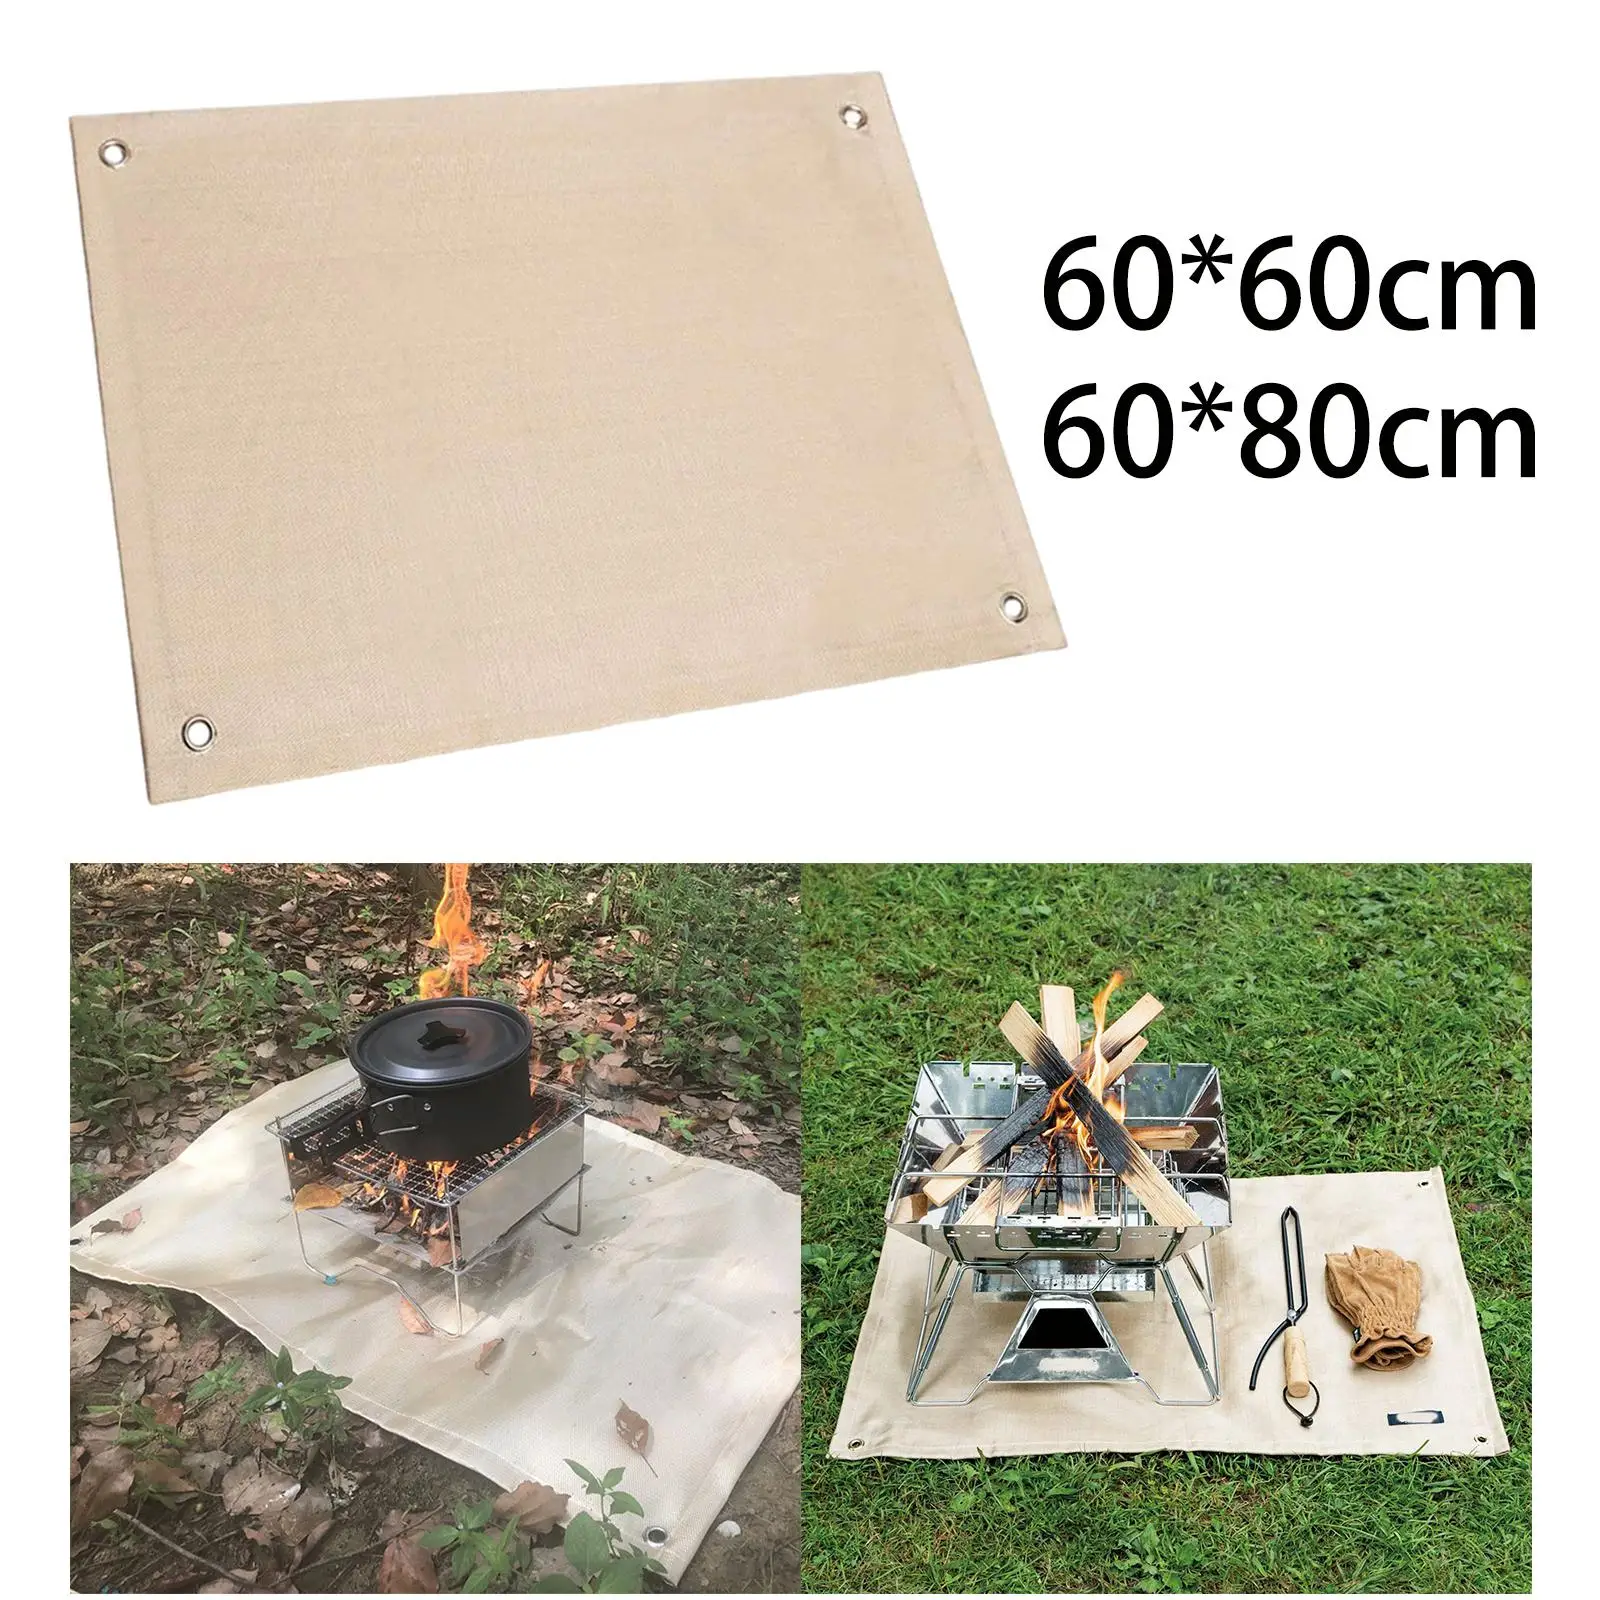 Camping Fire Blanket Shockproof High Temperature Resistant Anti Scald Fireproof Mat for Picnics Lawn Outdoor Activities Deck BBQ